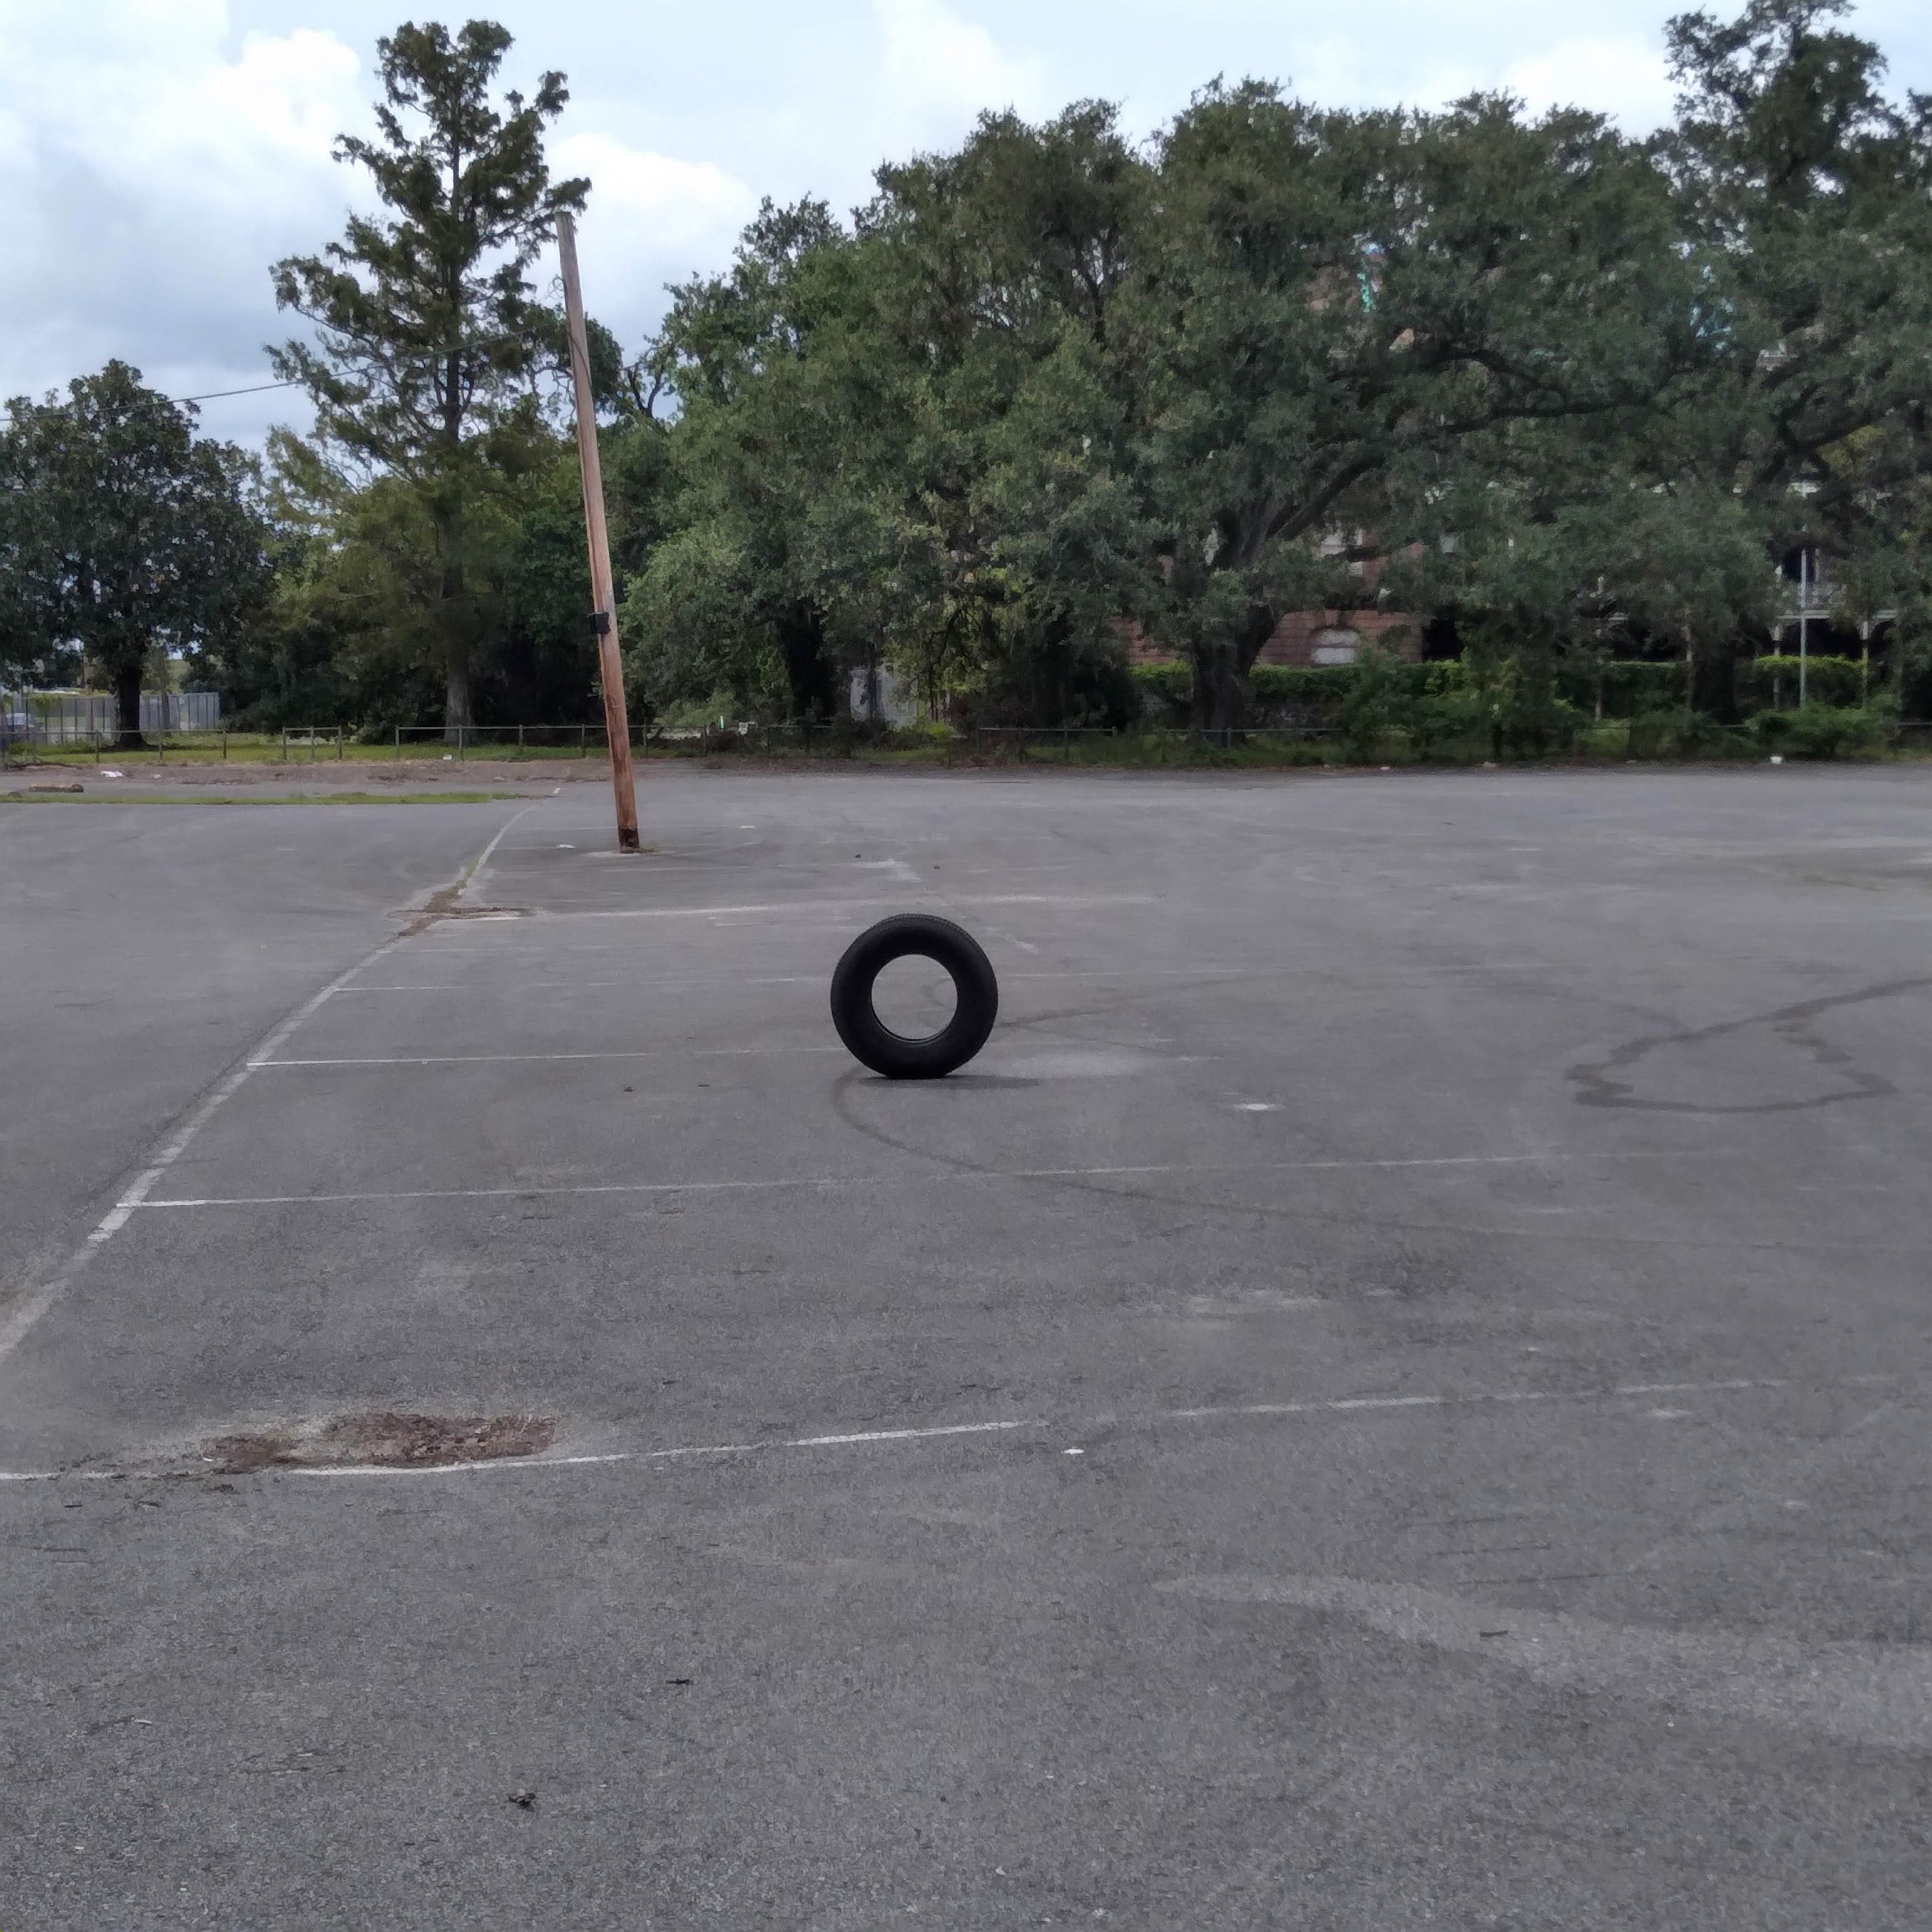 Standing tire in Holy Cross parking lot, New Orleans, Louisiana, October 5, 2021